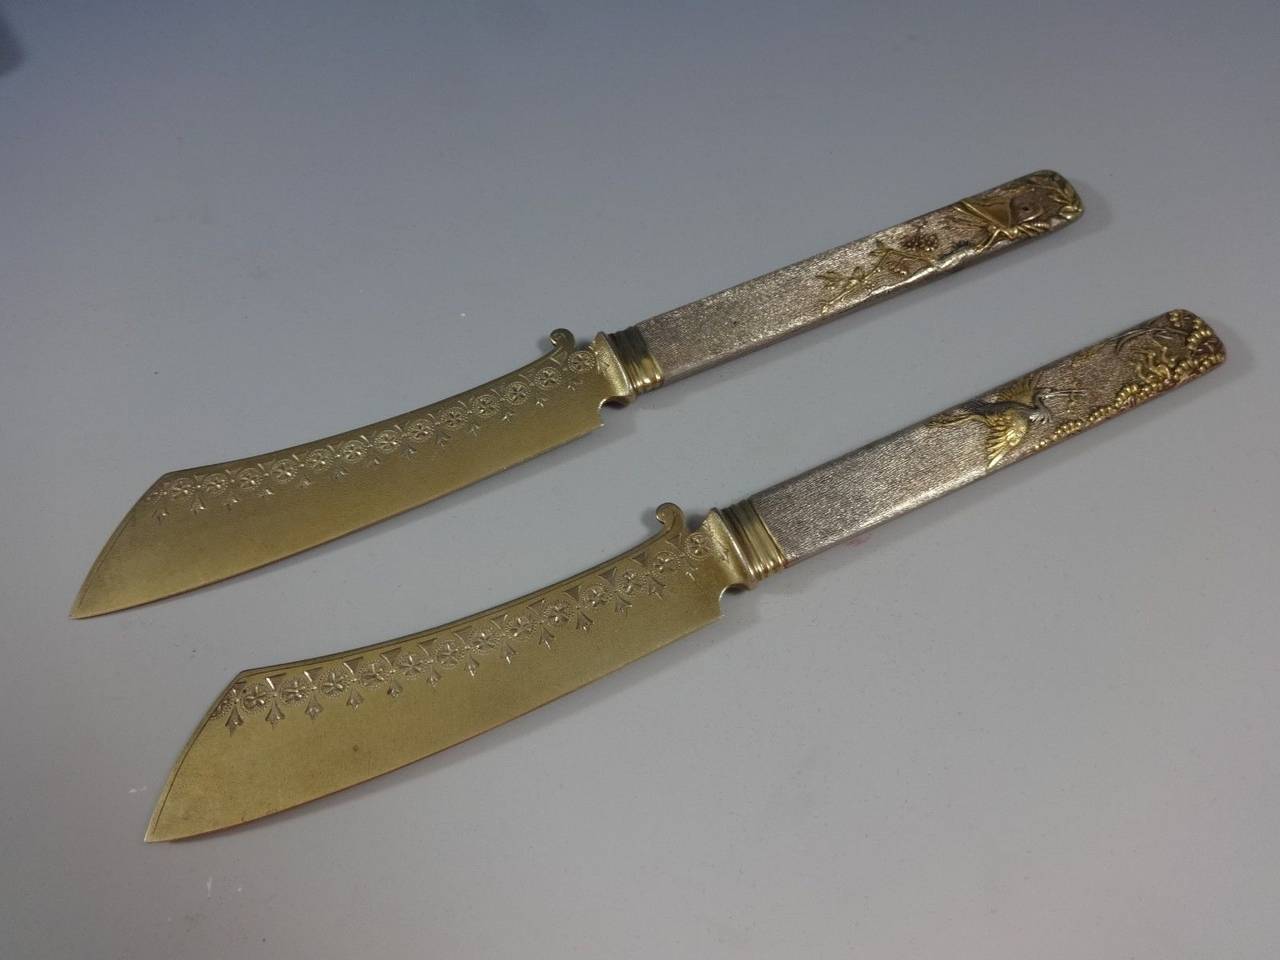 Museum quality pair of mixed metals cheese knives made by Whiting with applied elements, 7 ½” - One with gold and copper butterfly motif, the other with stork and young motif. Brite-cut engraved blades. Given as 50th wedding anniversary gift in the